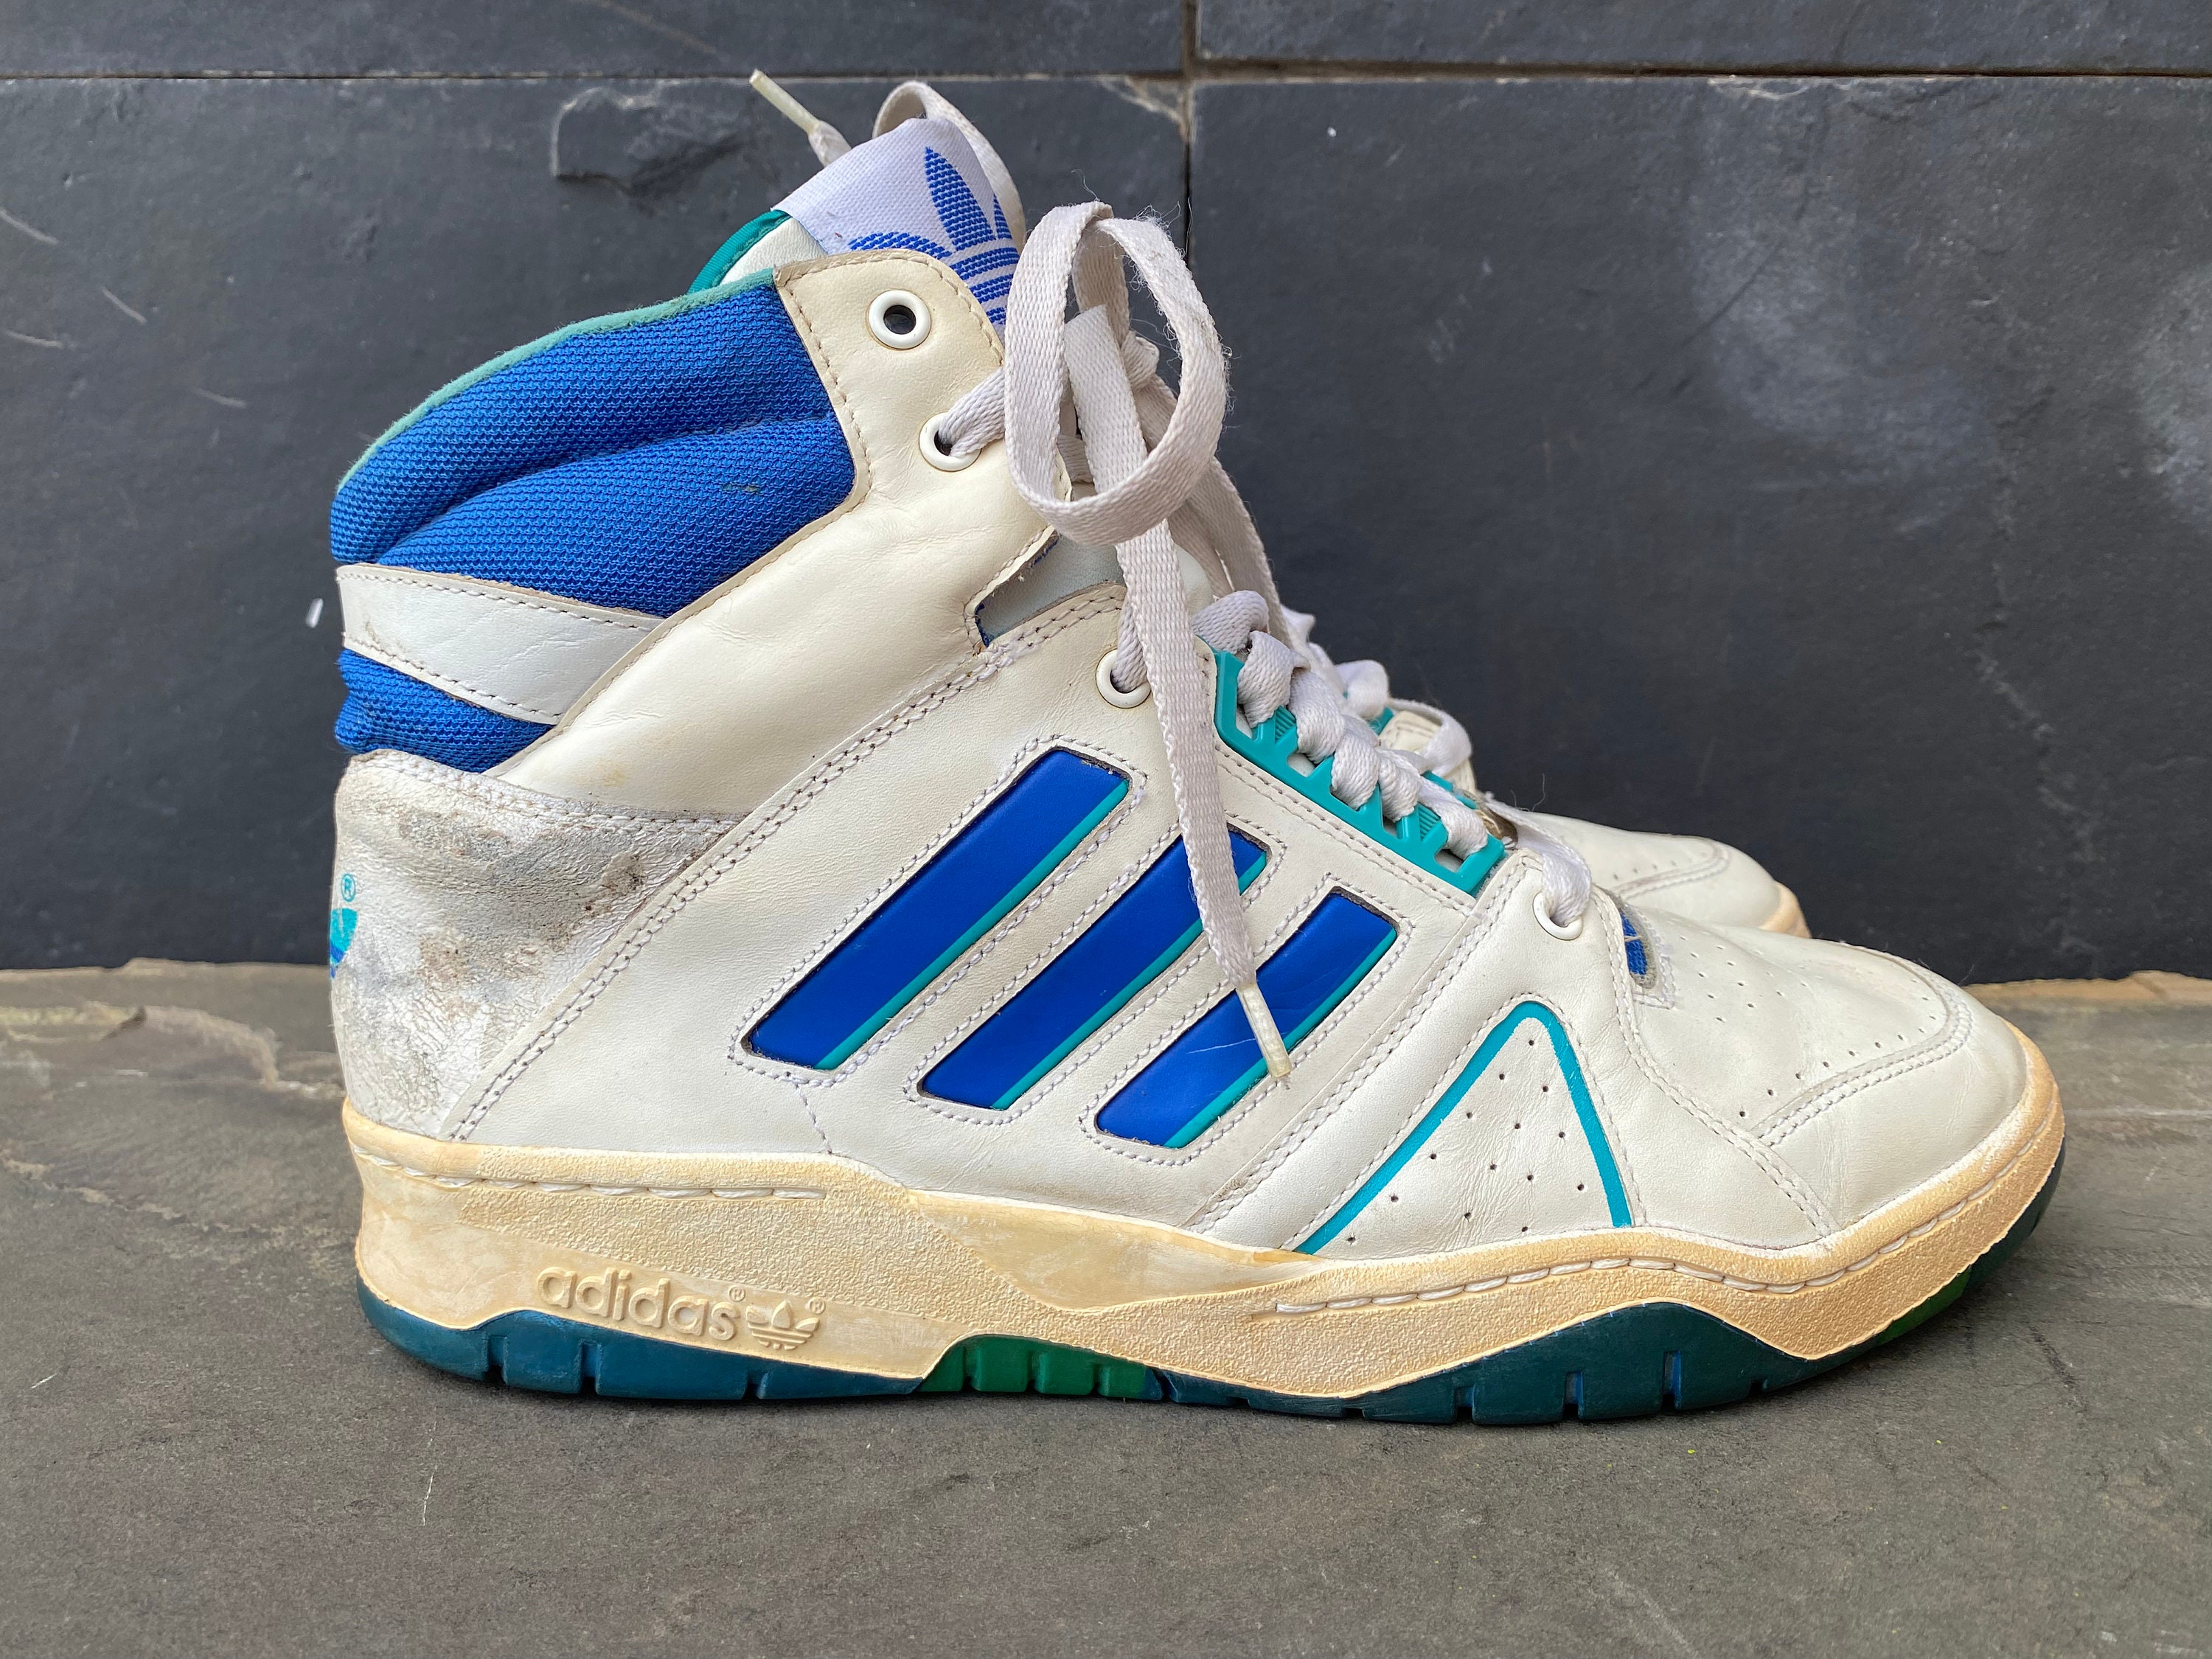 Vintage Adidas Decade Basketball Boots Sneakers Hi Top Leather Original  80's 423